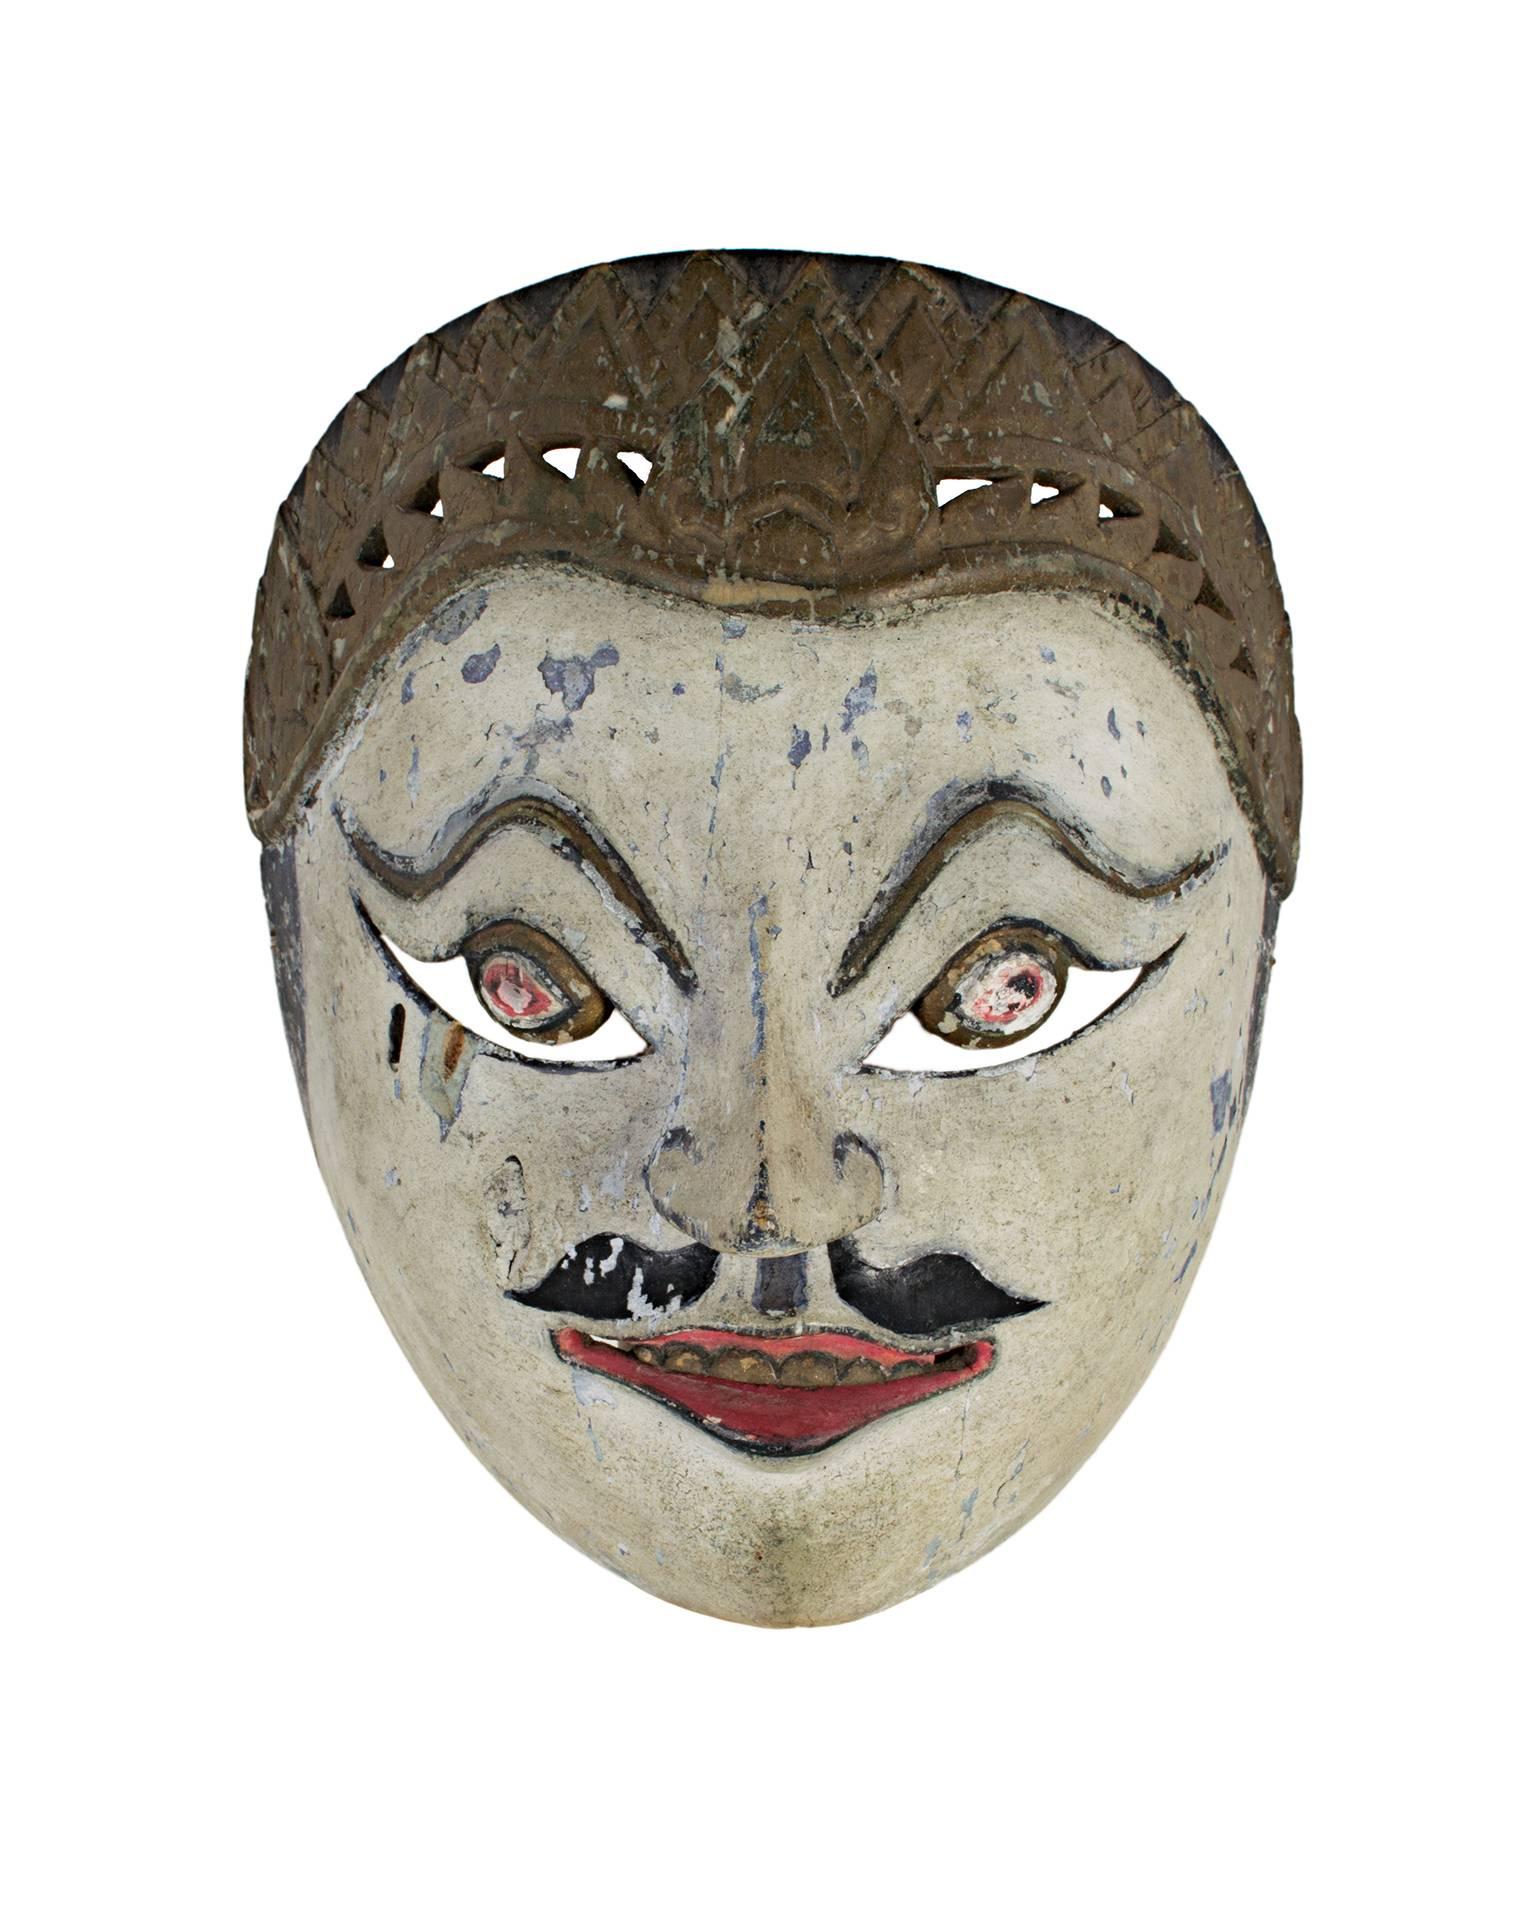 "Mask with White Face, Round Eyes, and Painted Mustache, " Wood from Indonesia - Sculpture by Unknown